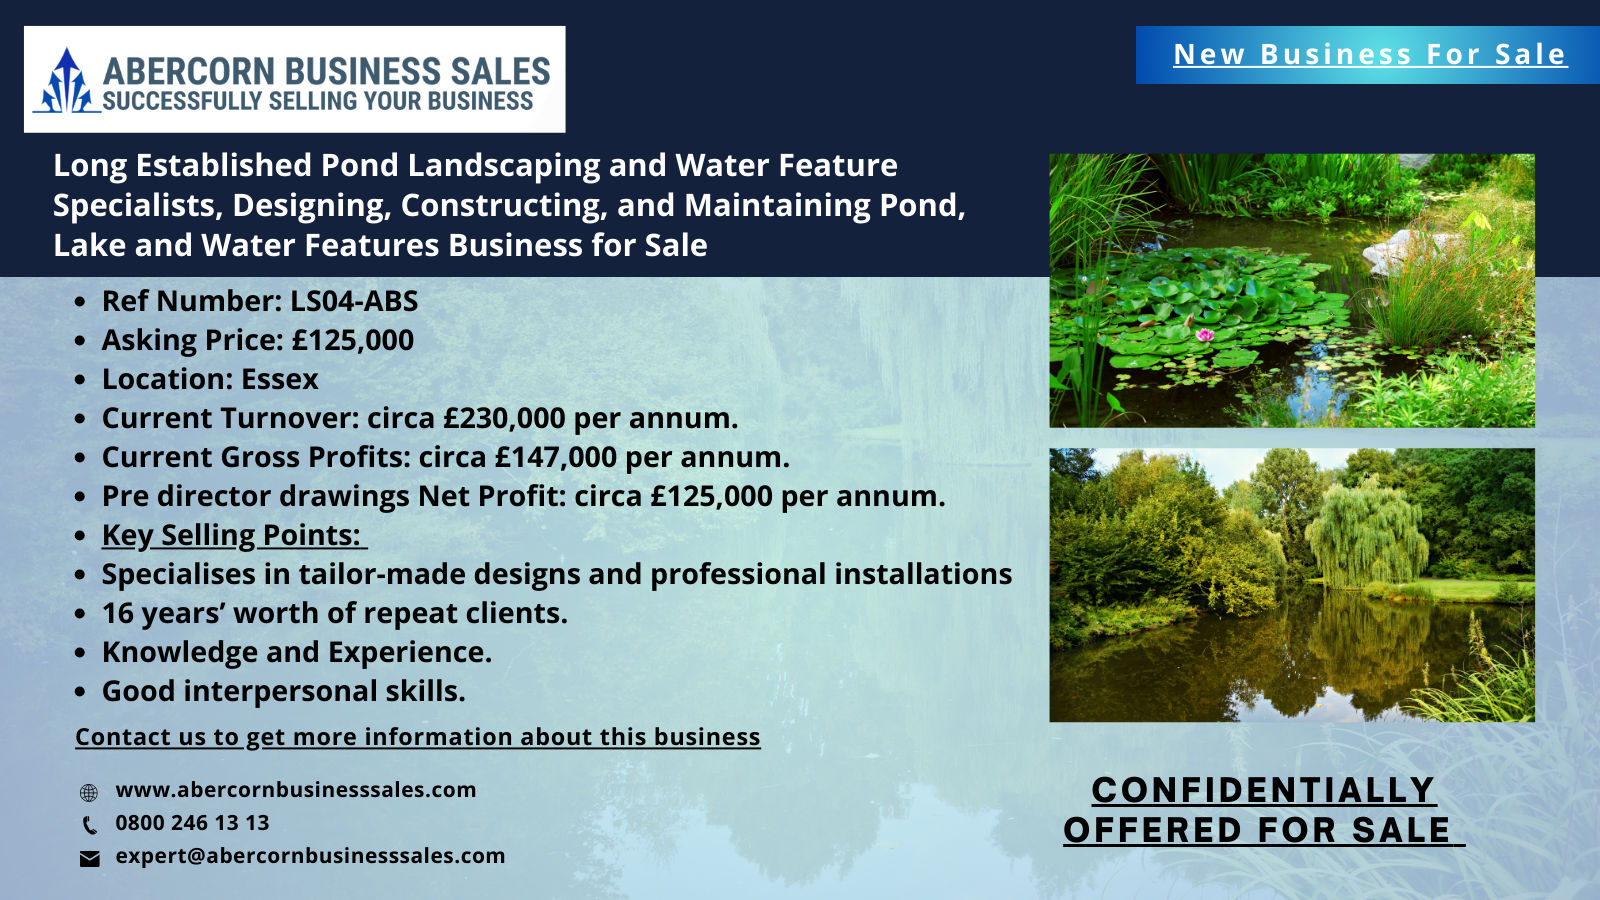 LS04-ABS - Long Established Pond Landscaping and Water Feature Specialists, Designing, Constructing, and Maintaining Pond, Lake and Water Features Business for Sale